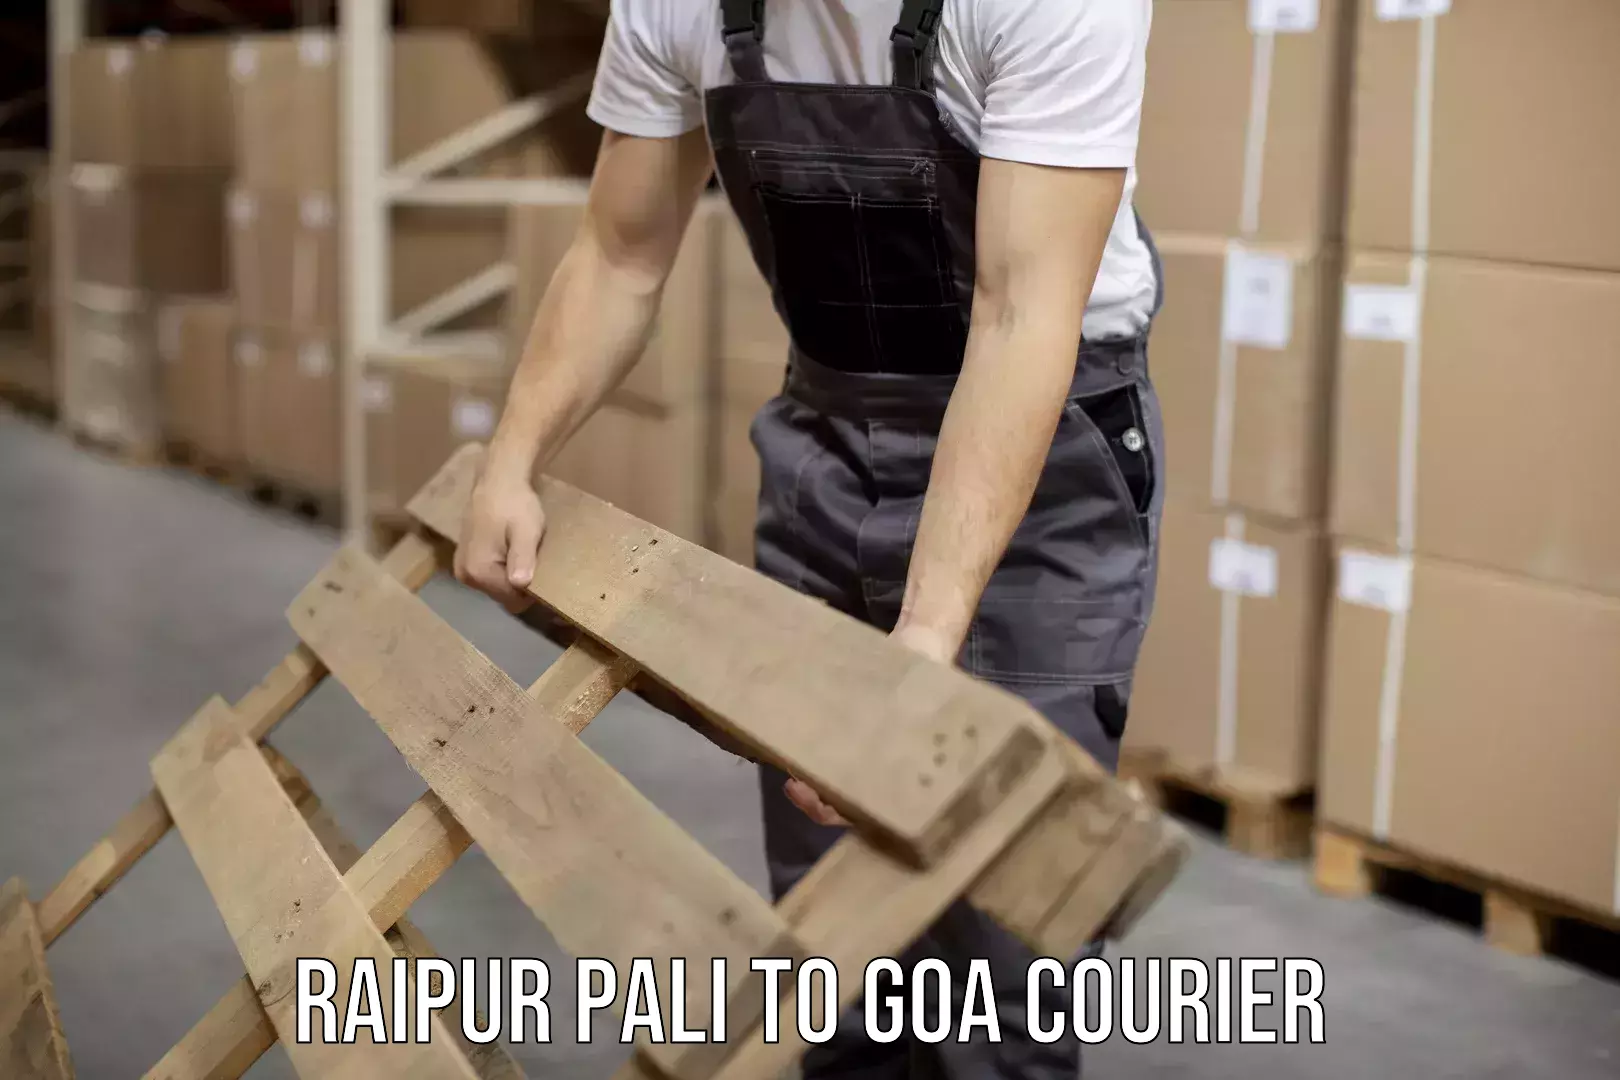 Quick courier services Raipur Pali to Panaji